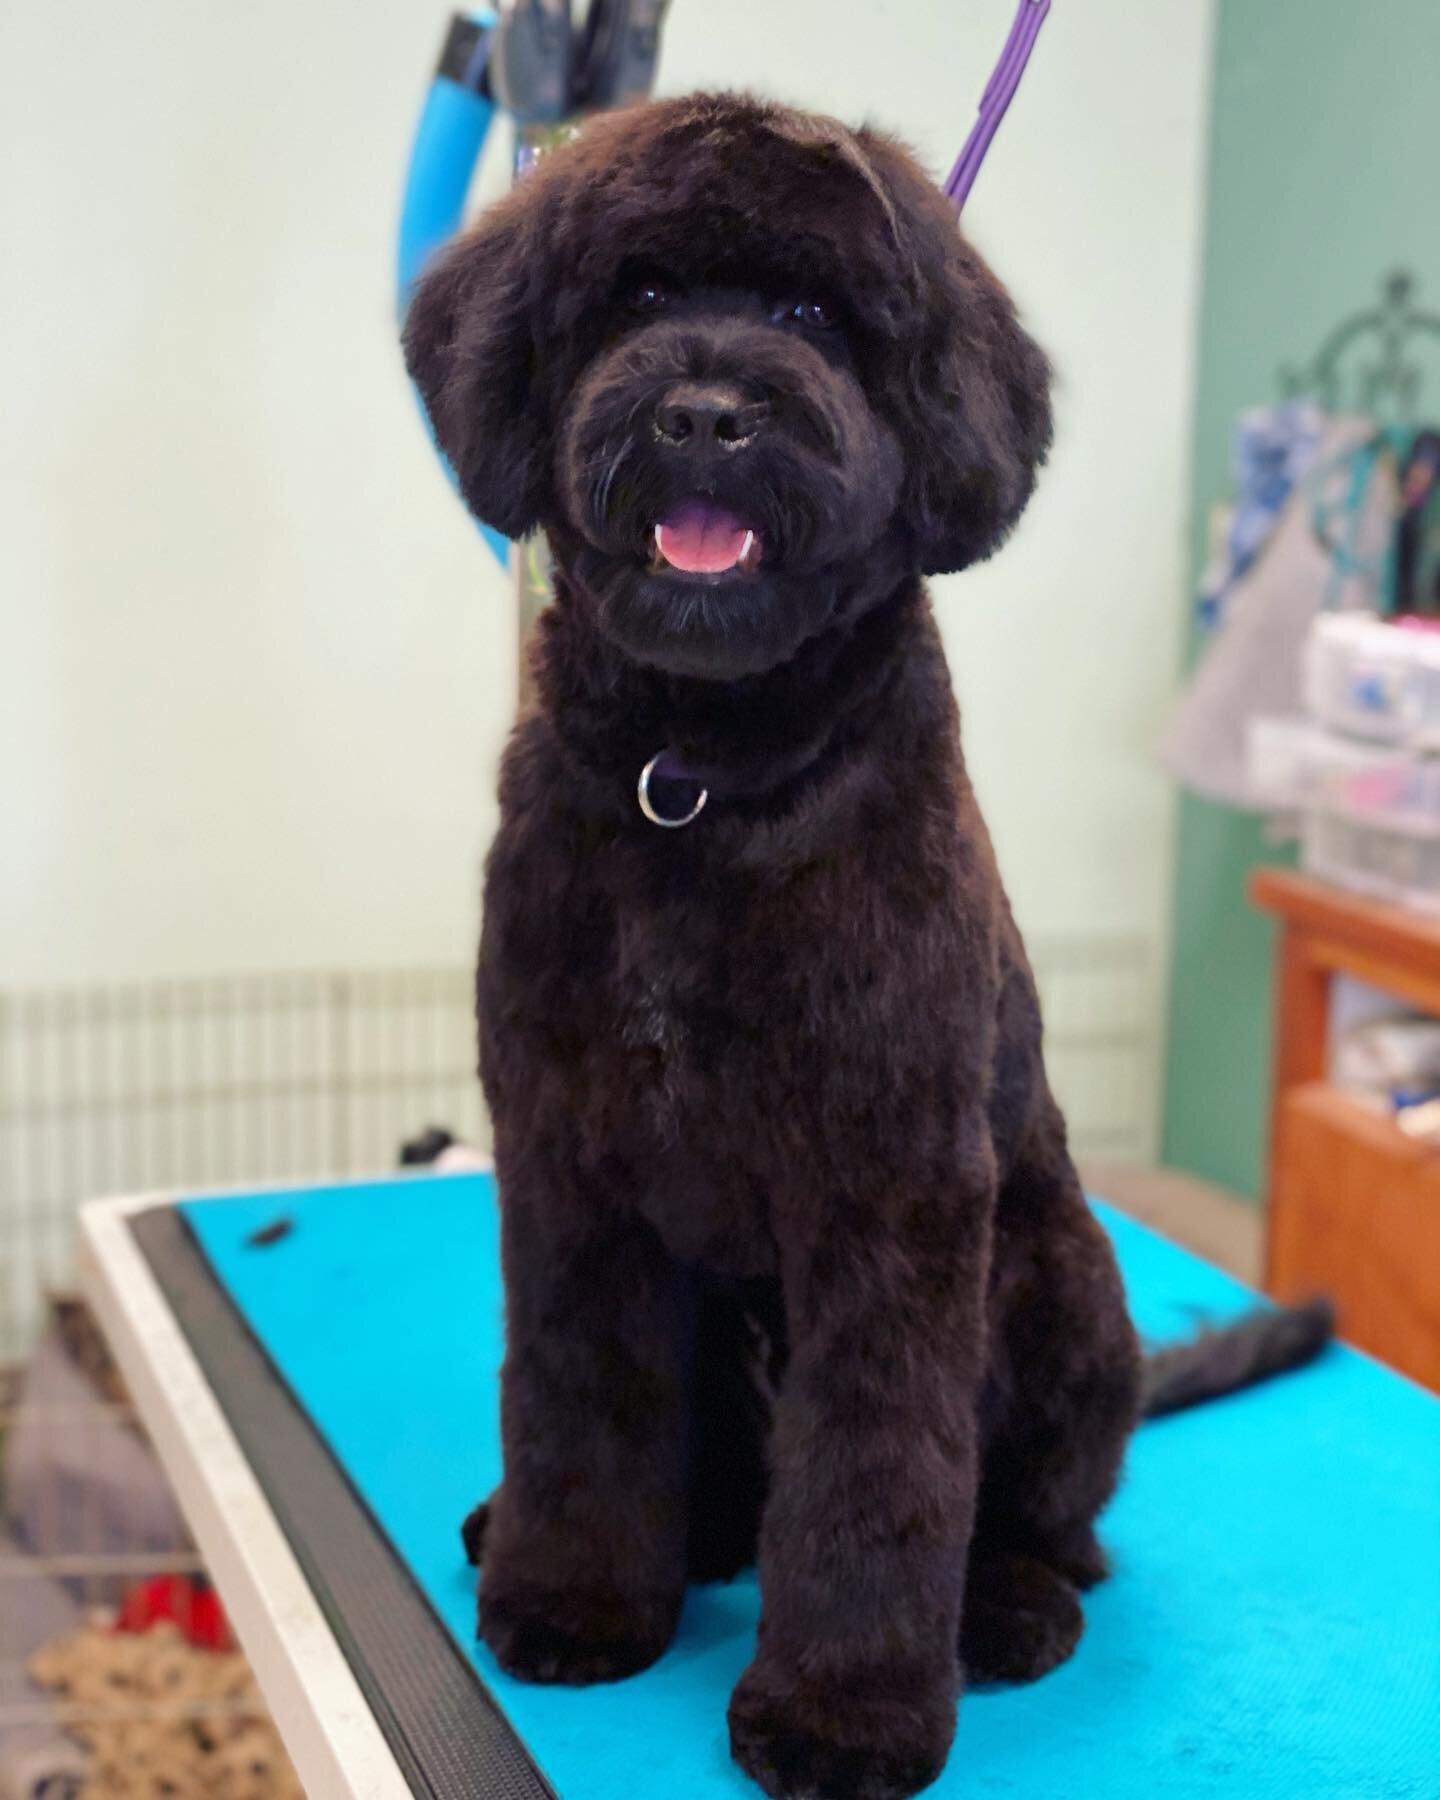 Paz the Portuguese Water Dog puppy came to see us for his first big boy haircut, what a cutie! #puppyhaircut #portiepuppy #portuguesewaterdog